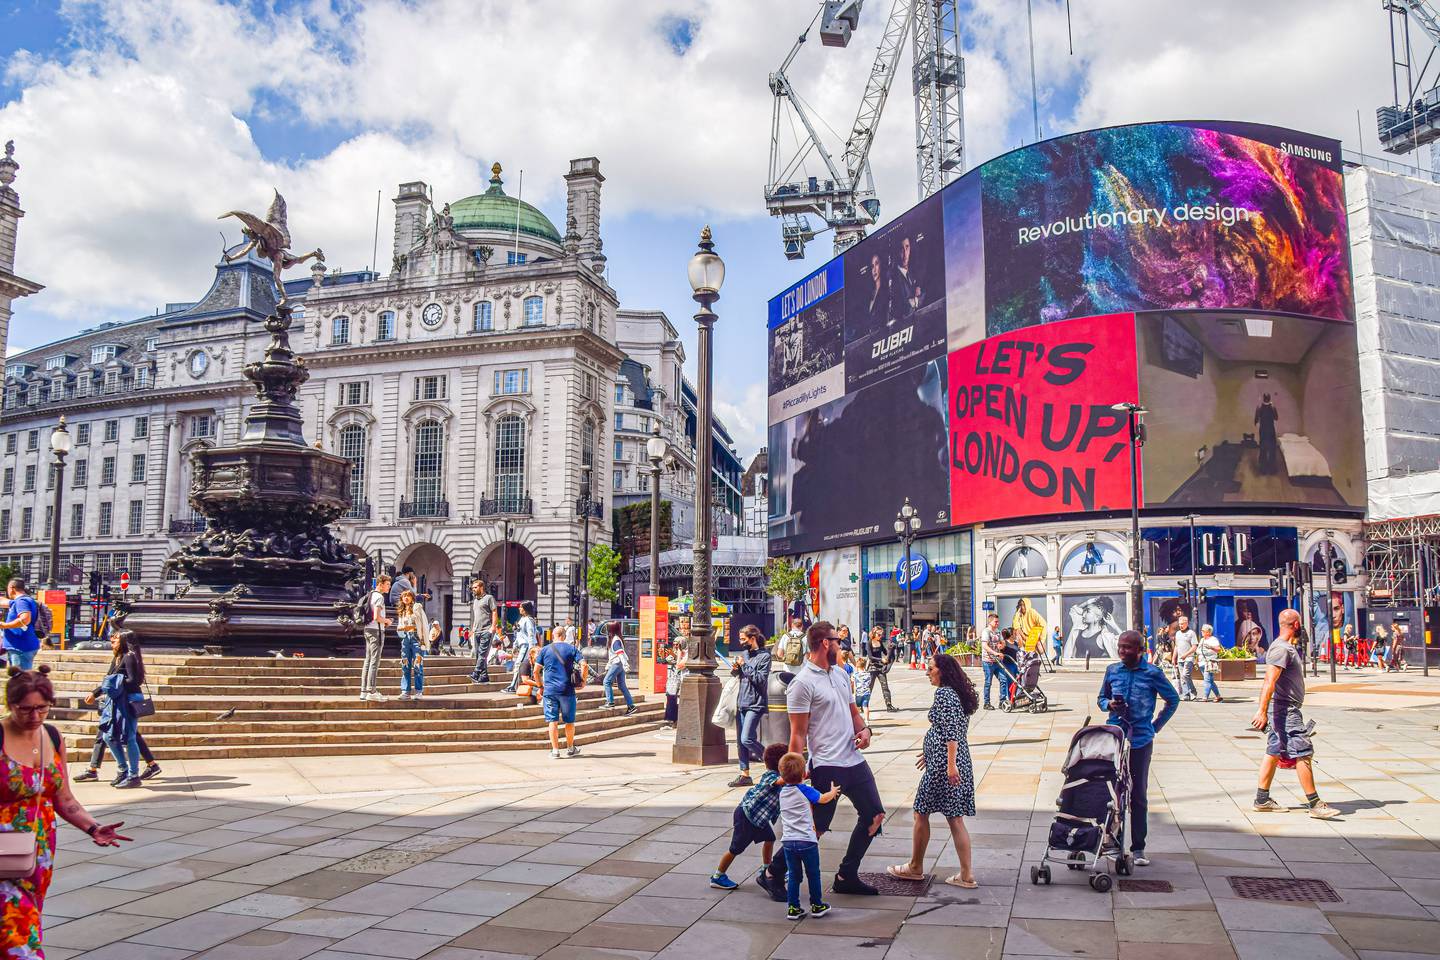 While 40 million international visitors headed to the UK in 2019, that dropped to 7 million in 2020. Getty Images